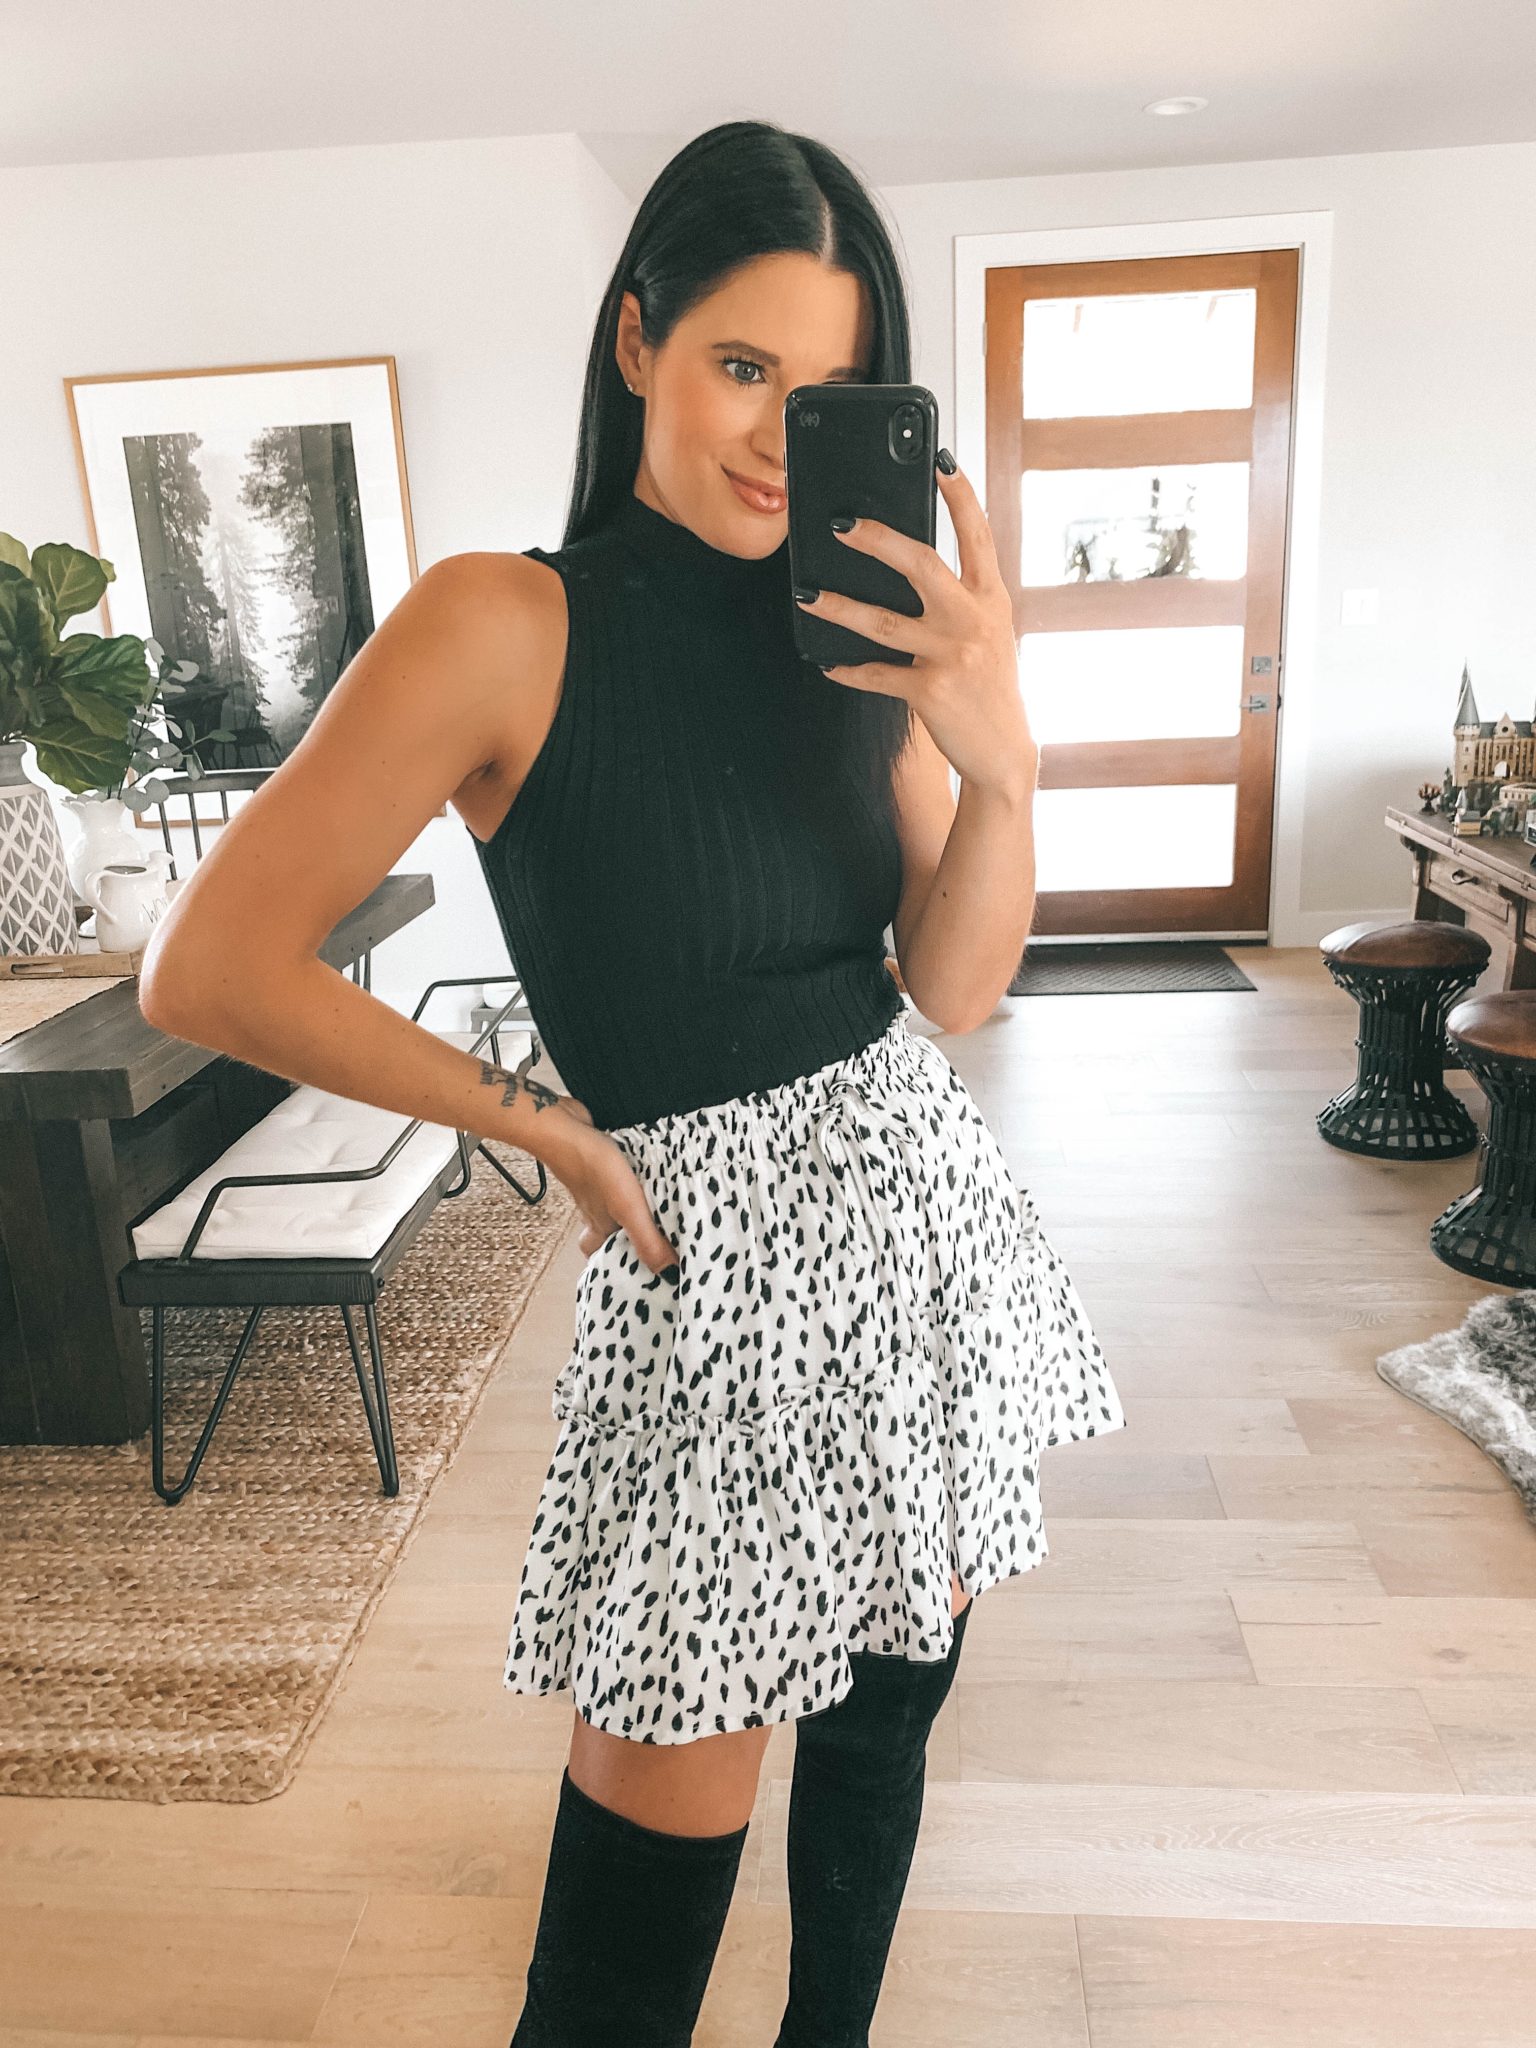 Transition Your Summer Looks Into Fall with Princess Polly Clothing by popular Austin fashion blog, Dressed to Kill: image of a woman wearing a Princess Polly black sweater tank, white with black dots mini skirt, and over the knee boots.